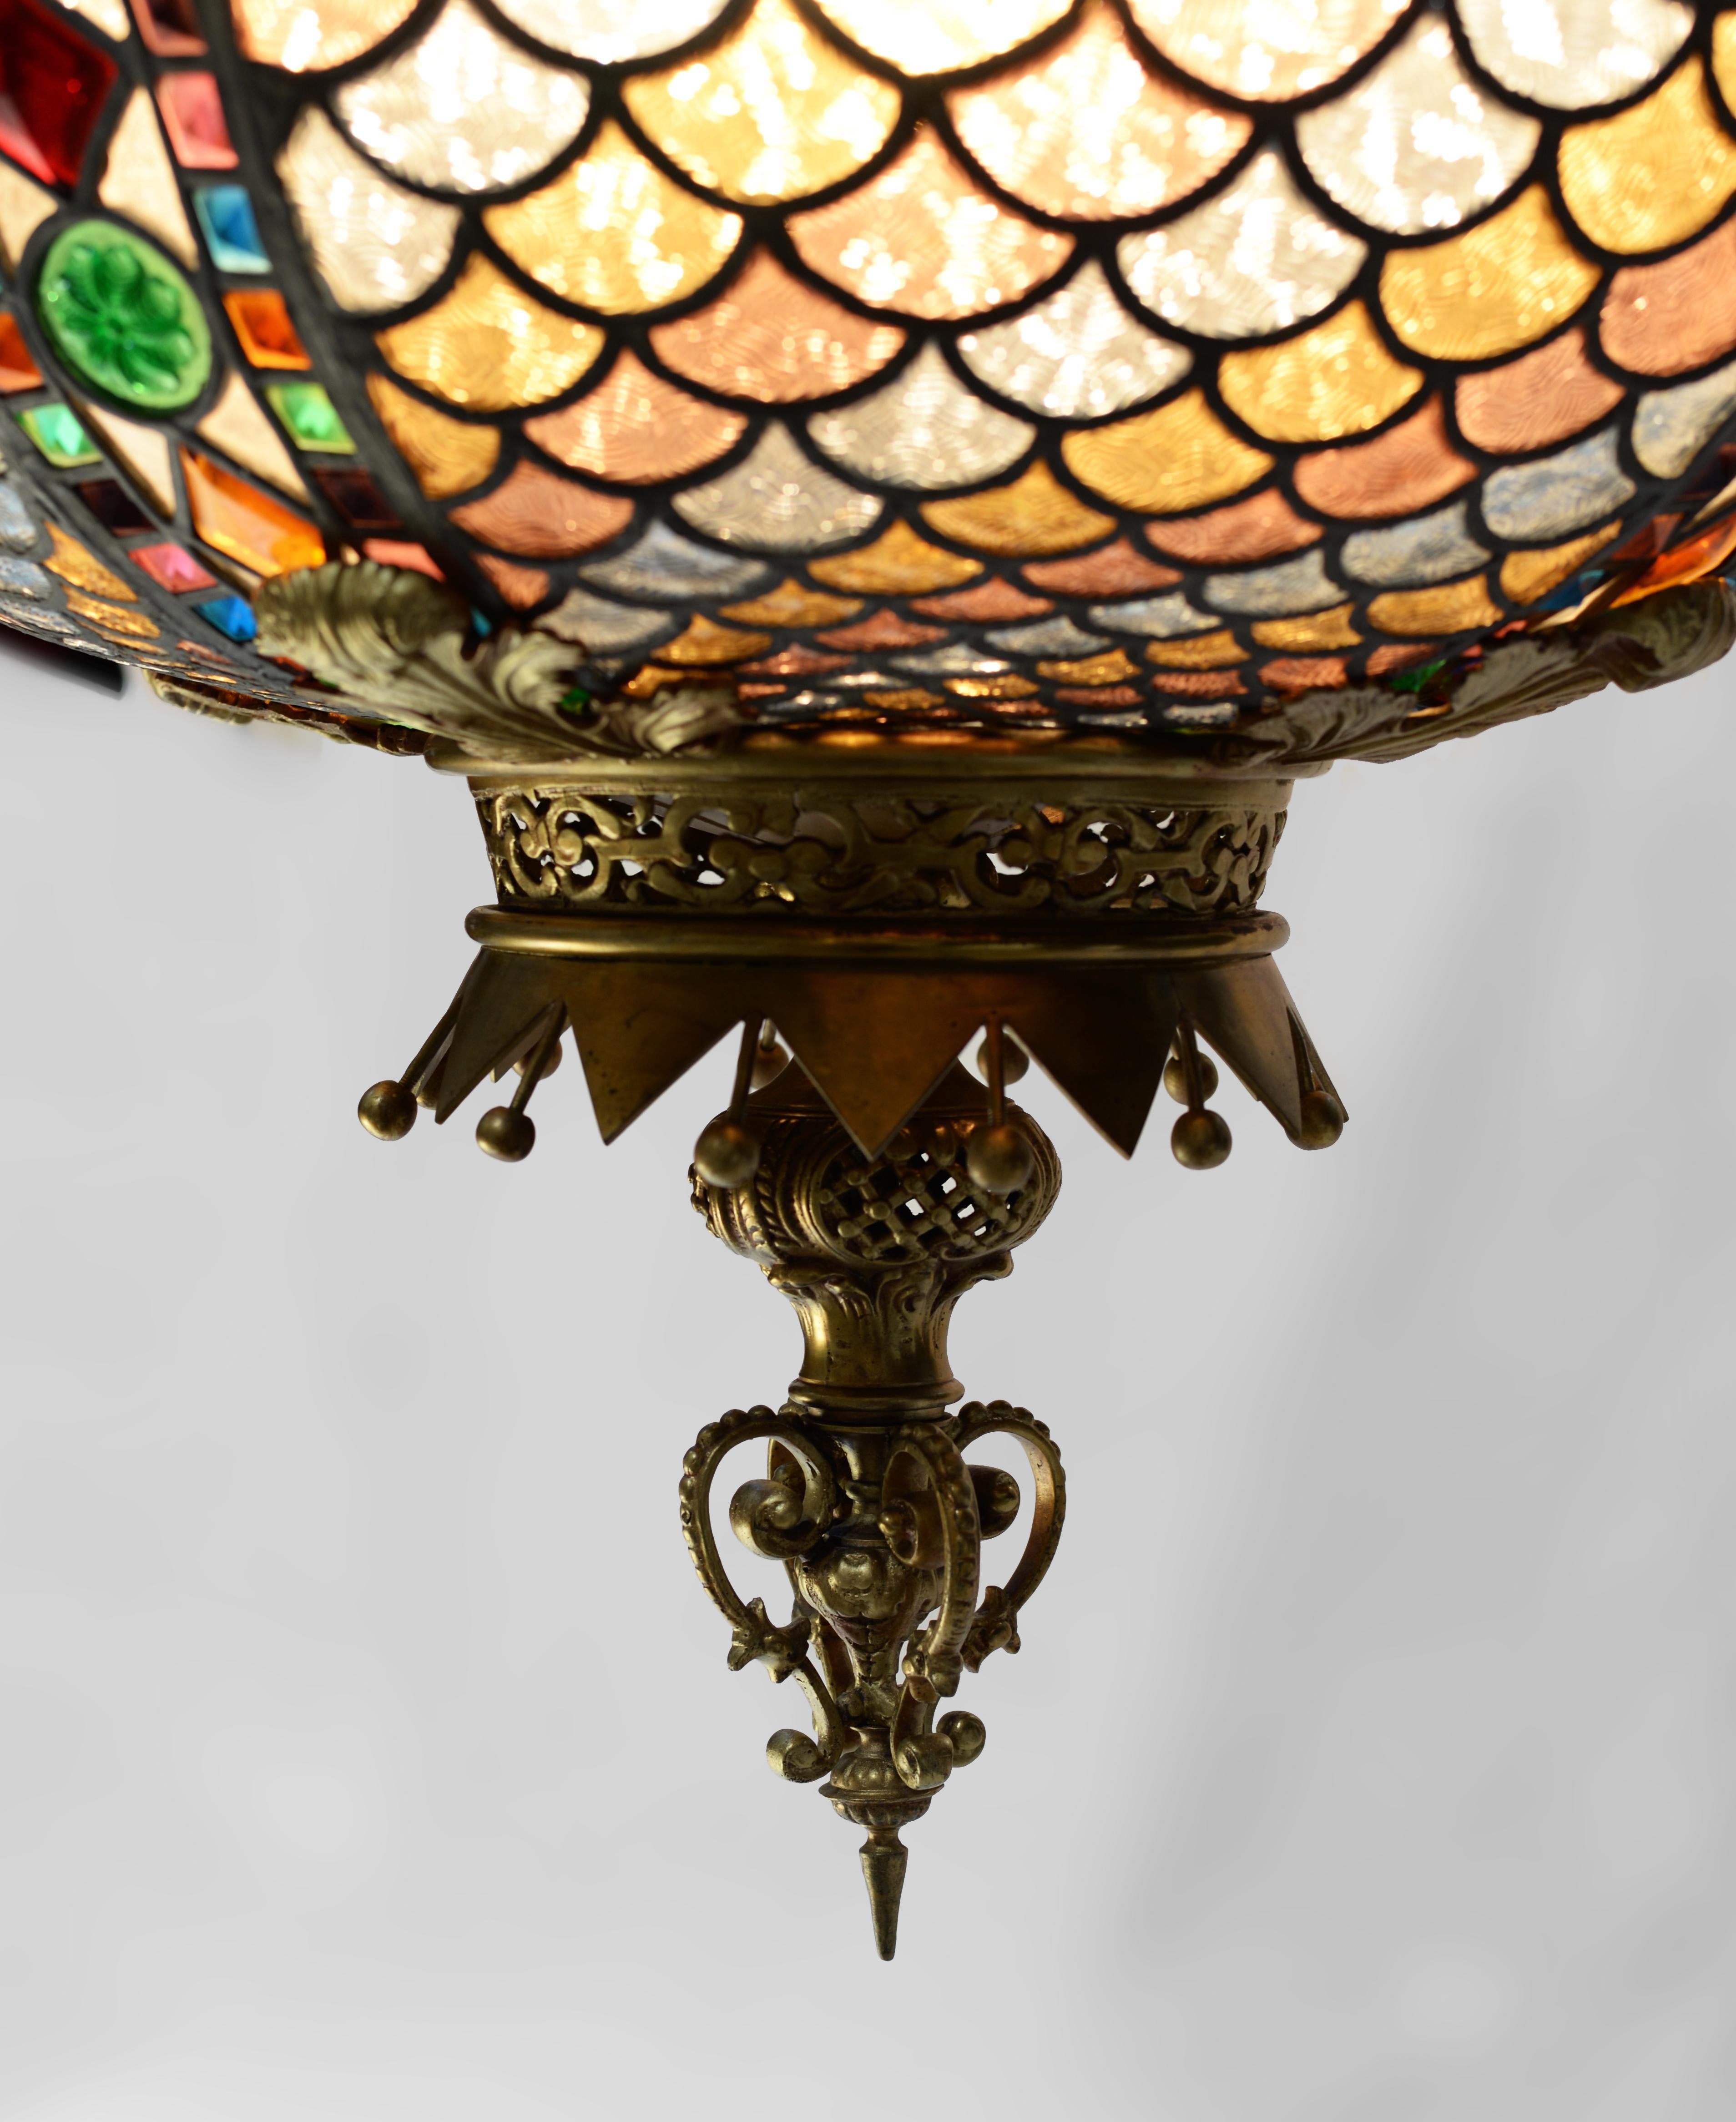 French Neo-Gothic Style Spherical Chandelier in Stained Glass, Late 19th Century For Sale